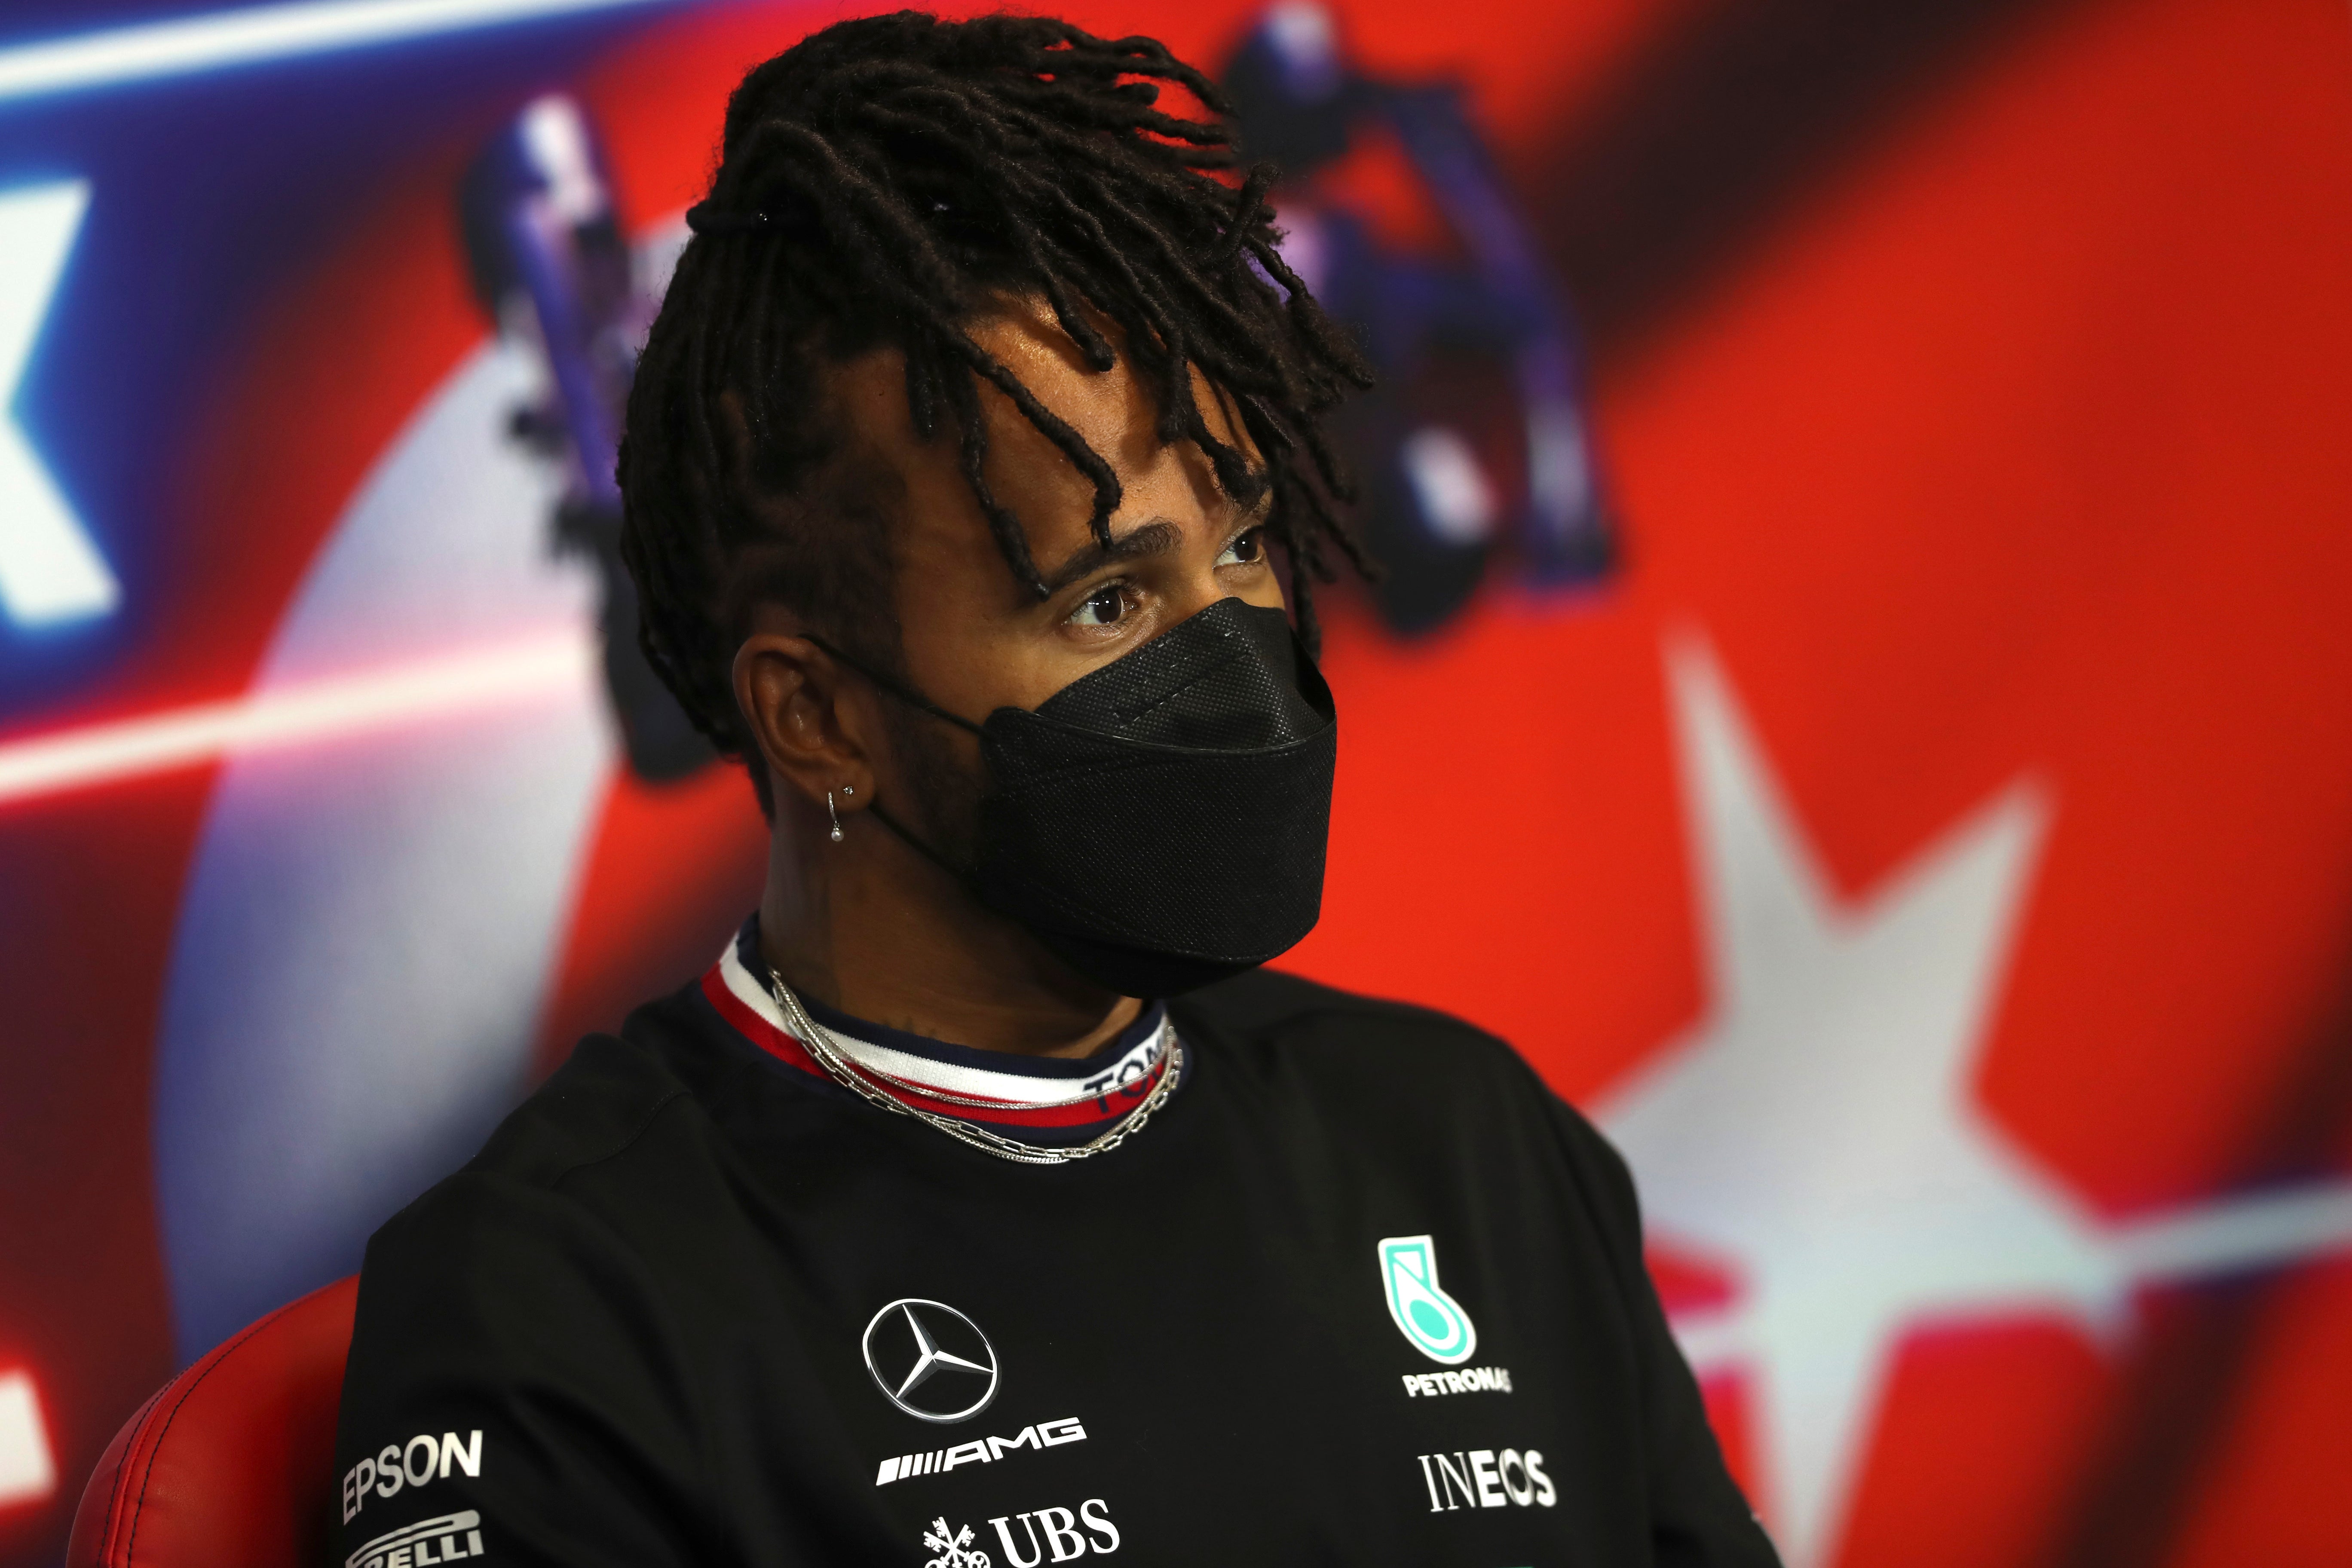 Hamilton will be penalised on the grid in Turkey